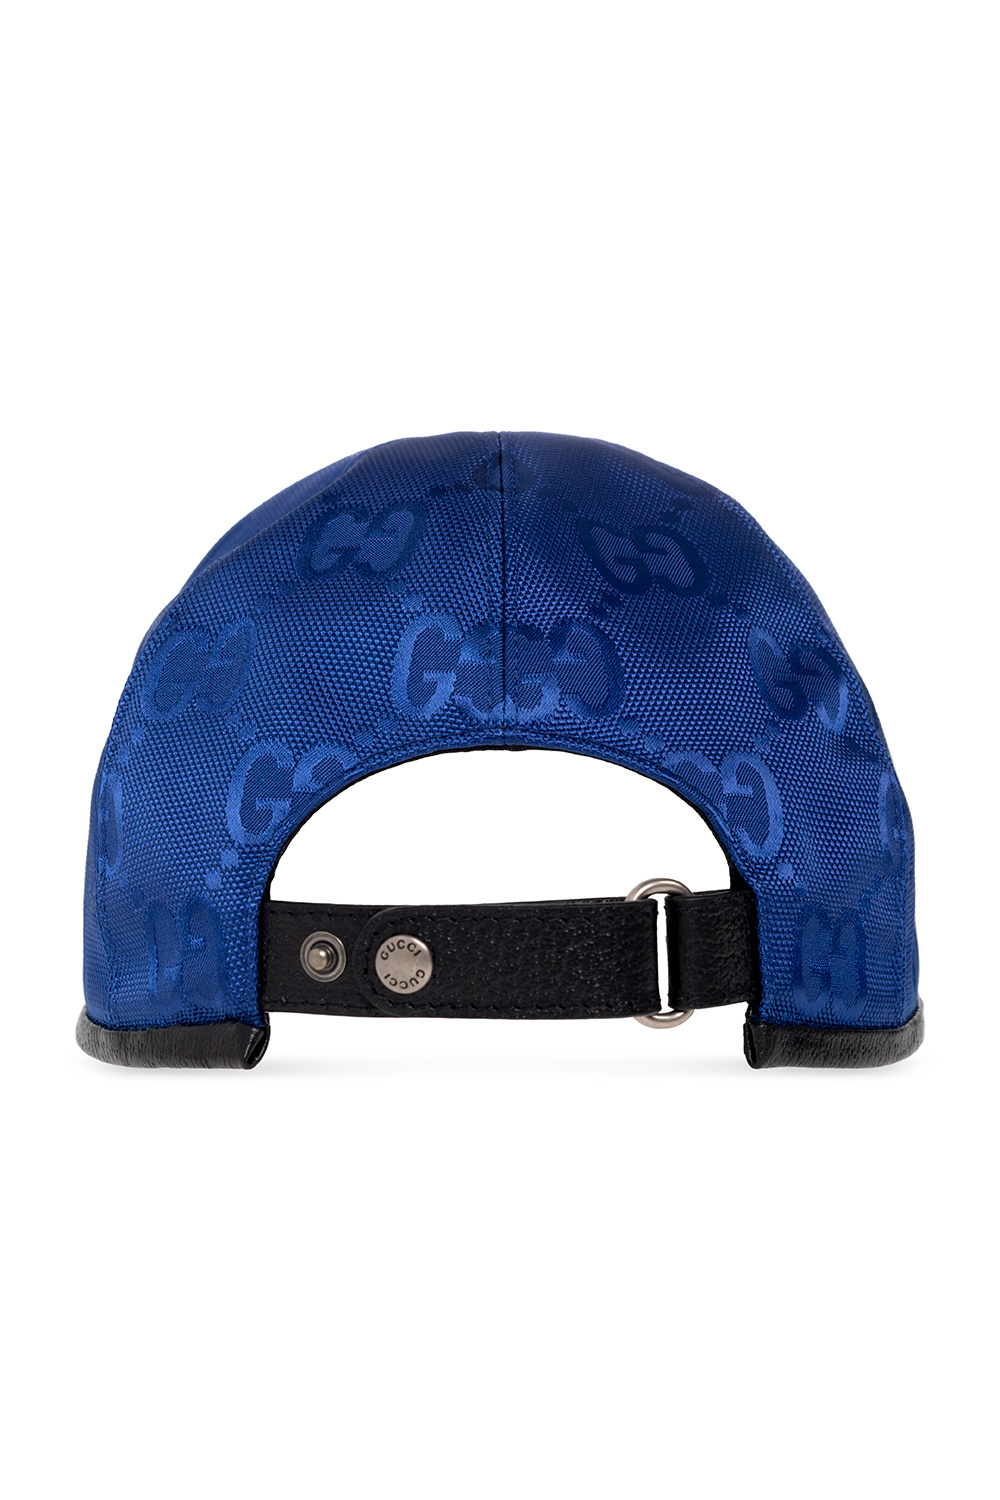 Off the Grid Gucci Hat - Blue – The Drip Department